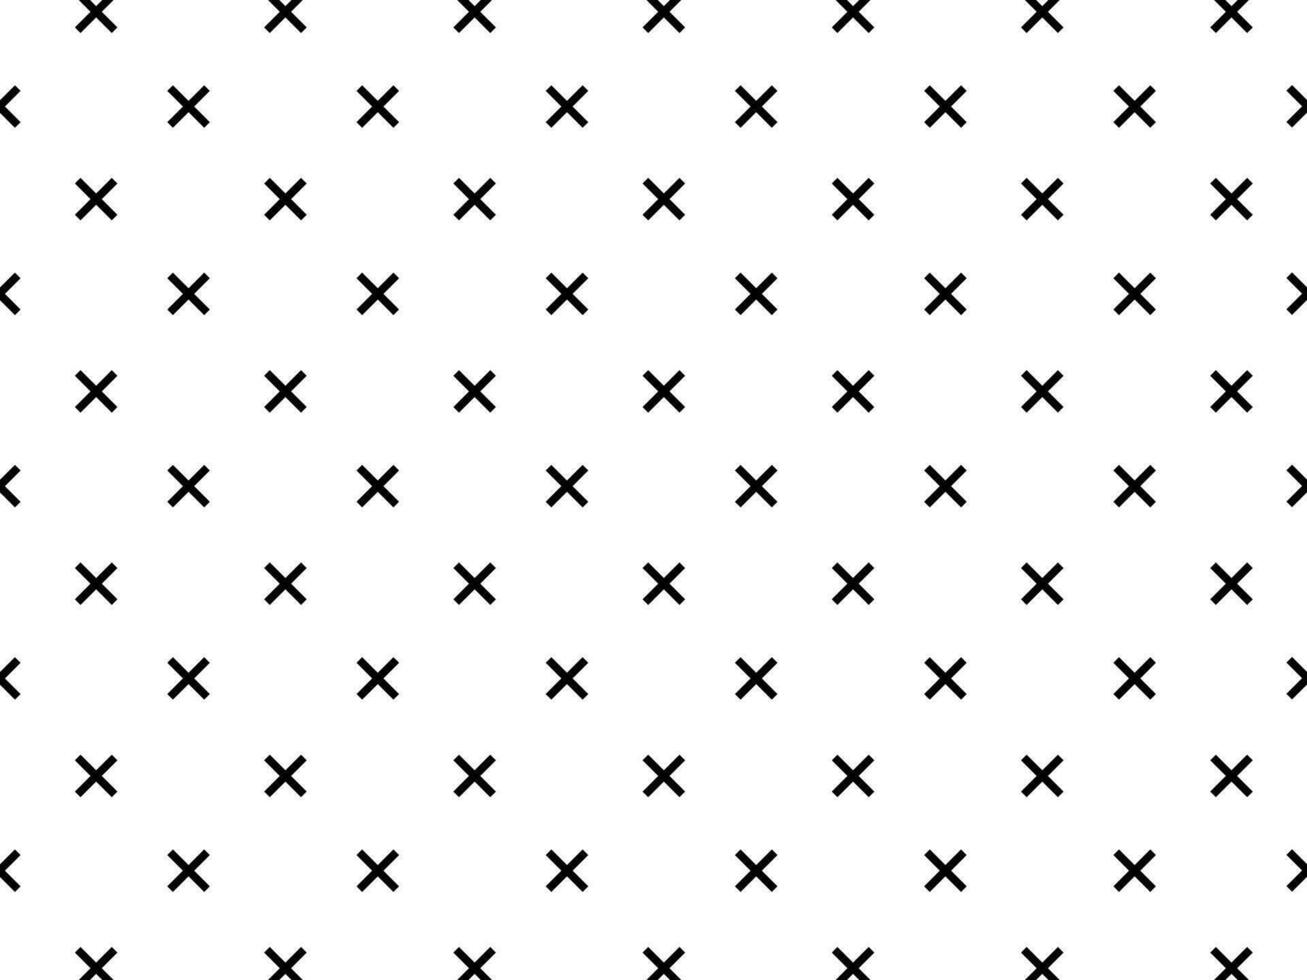 Black Cross pattern with white background. vector